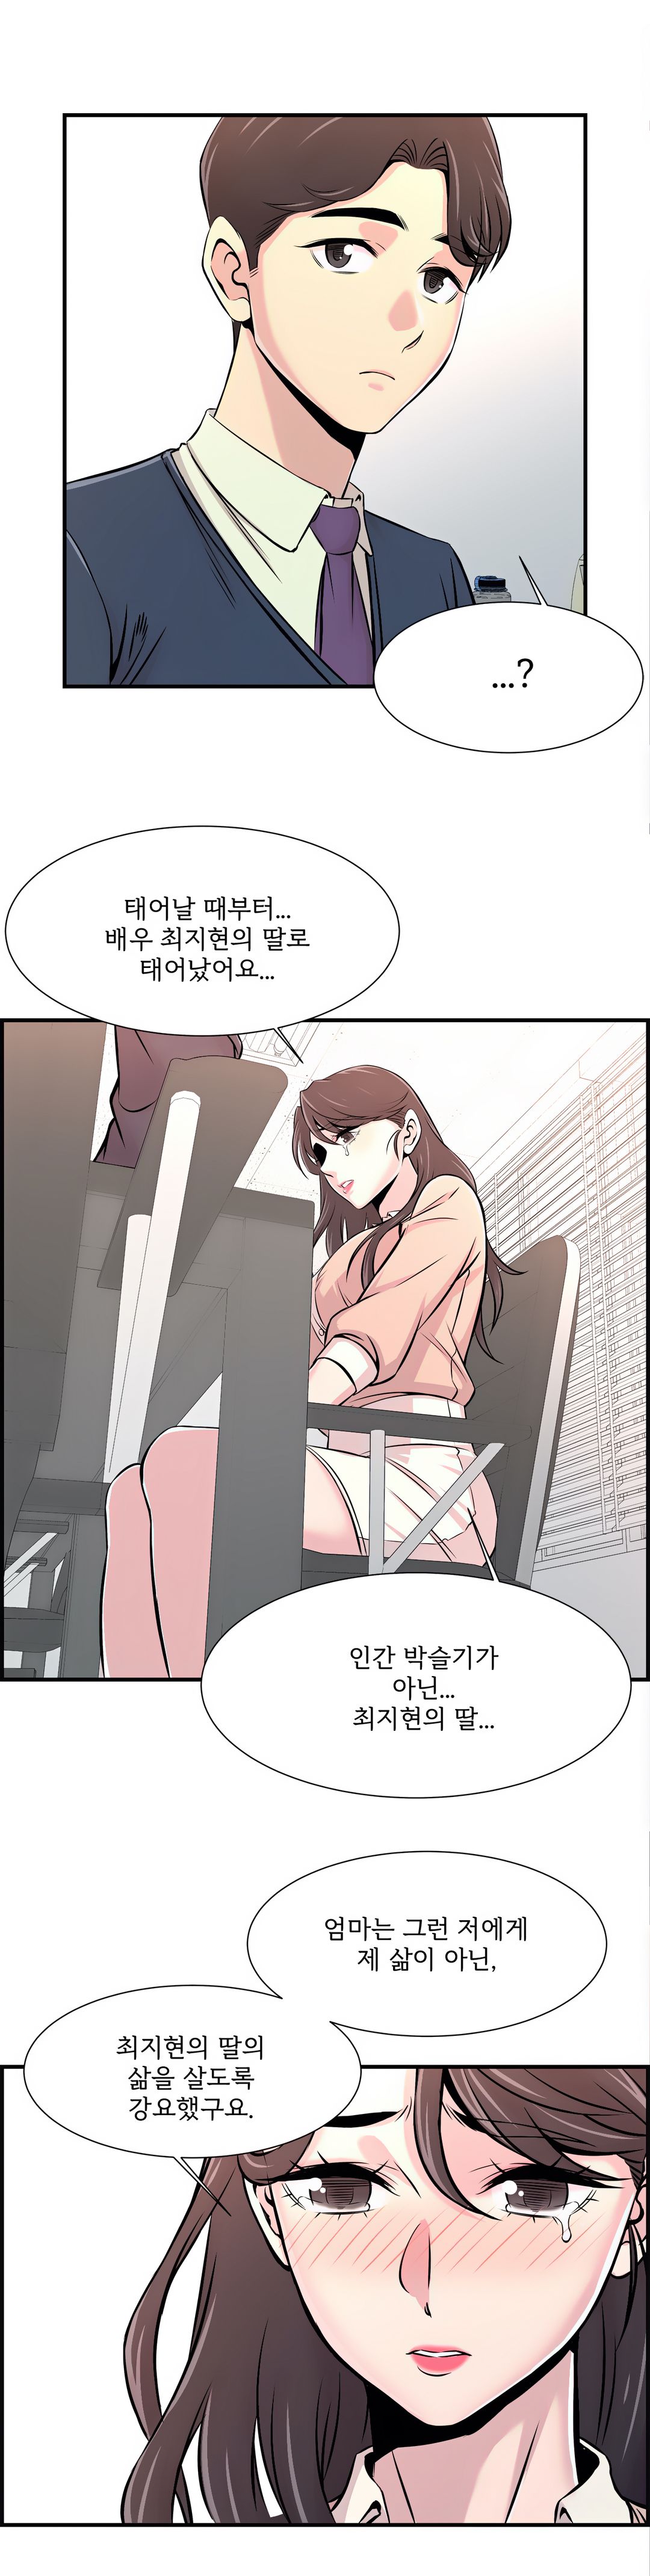 Cram School Scandal Raw - Chapter 14 Page 4